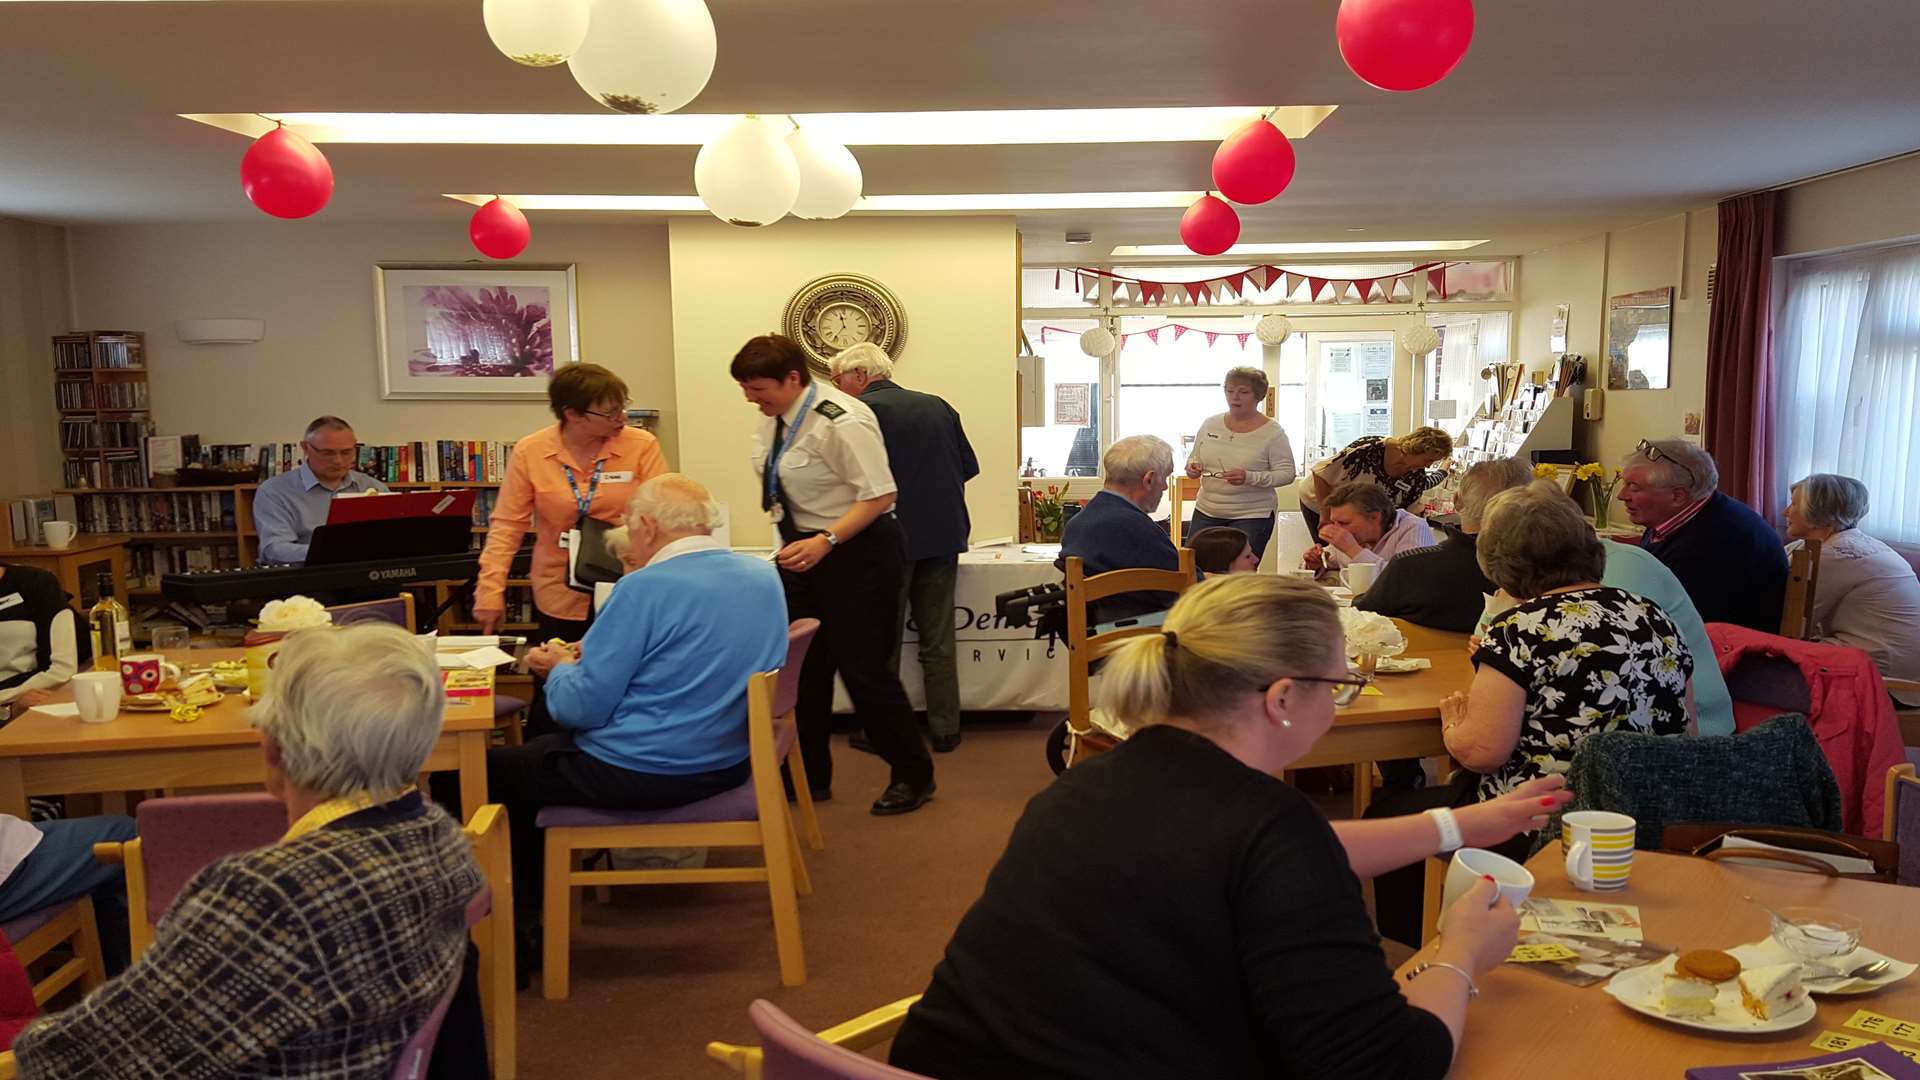 The free cafes take place once a month at various locations such as this one at Wellfield Community Hall in Hartley